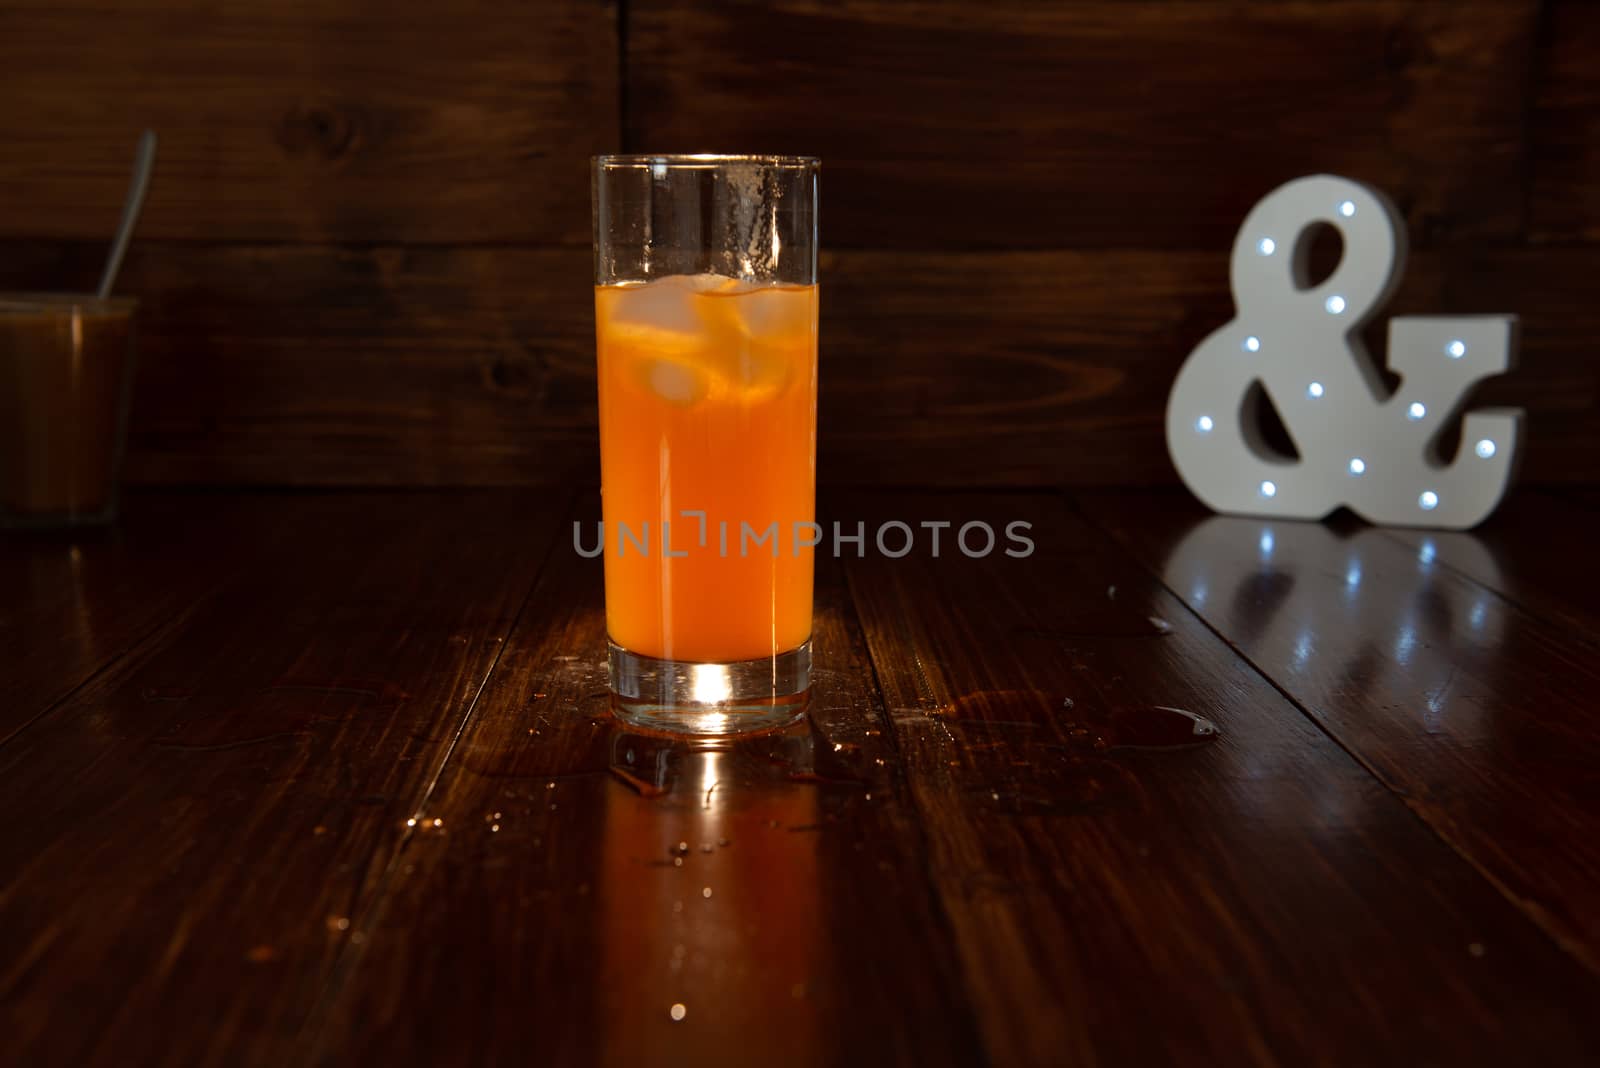 a glass of freshly squeezed juice on a wooden background and a glowing ampersand.